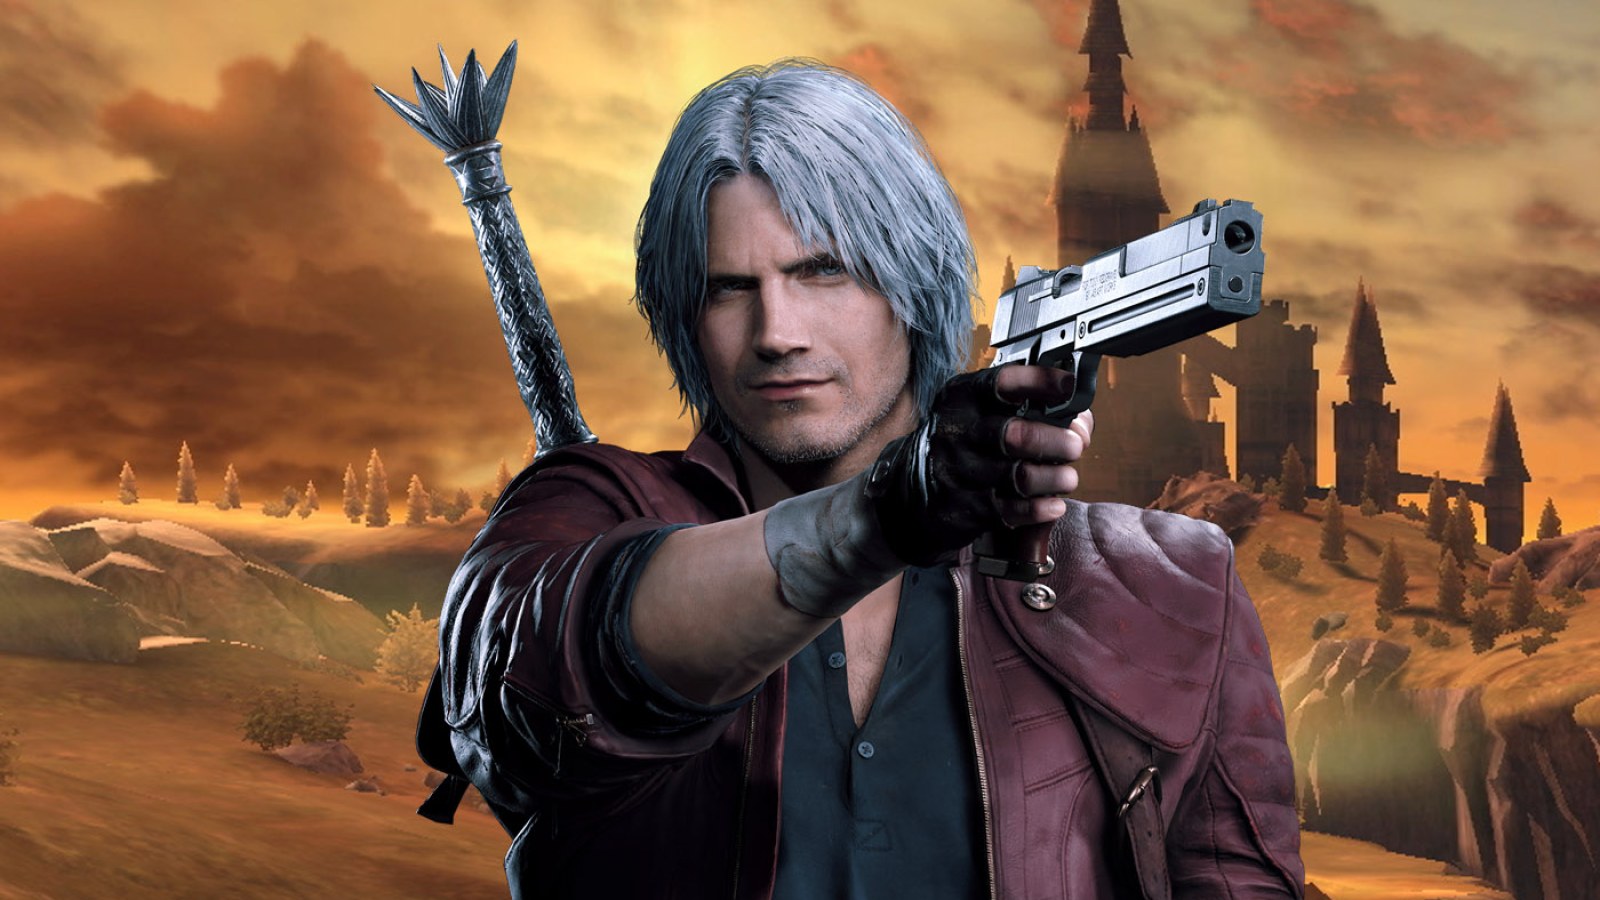 Devil May Cry Boss Addresses Dante Smash Ultimate Demand, Says Series  Should Be On Switch First